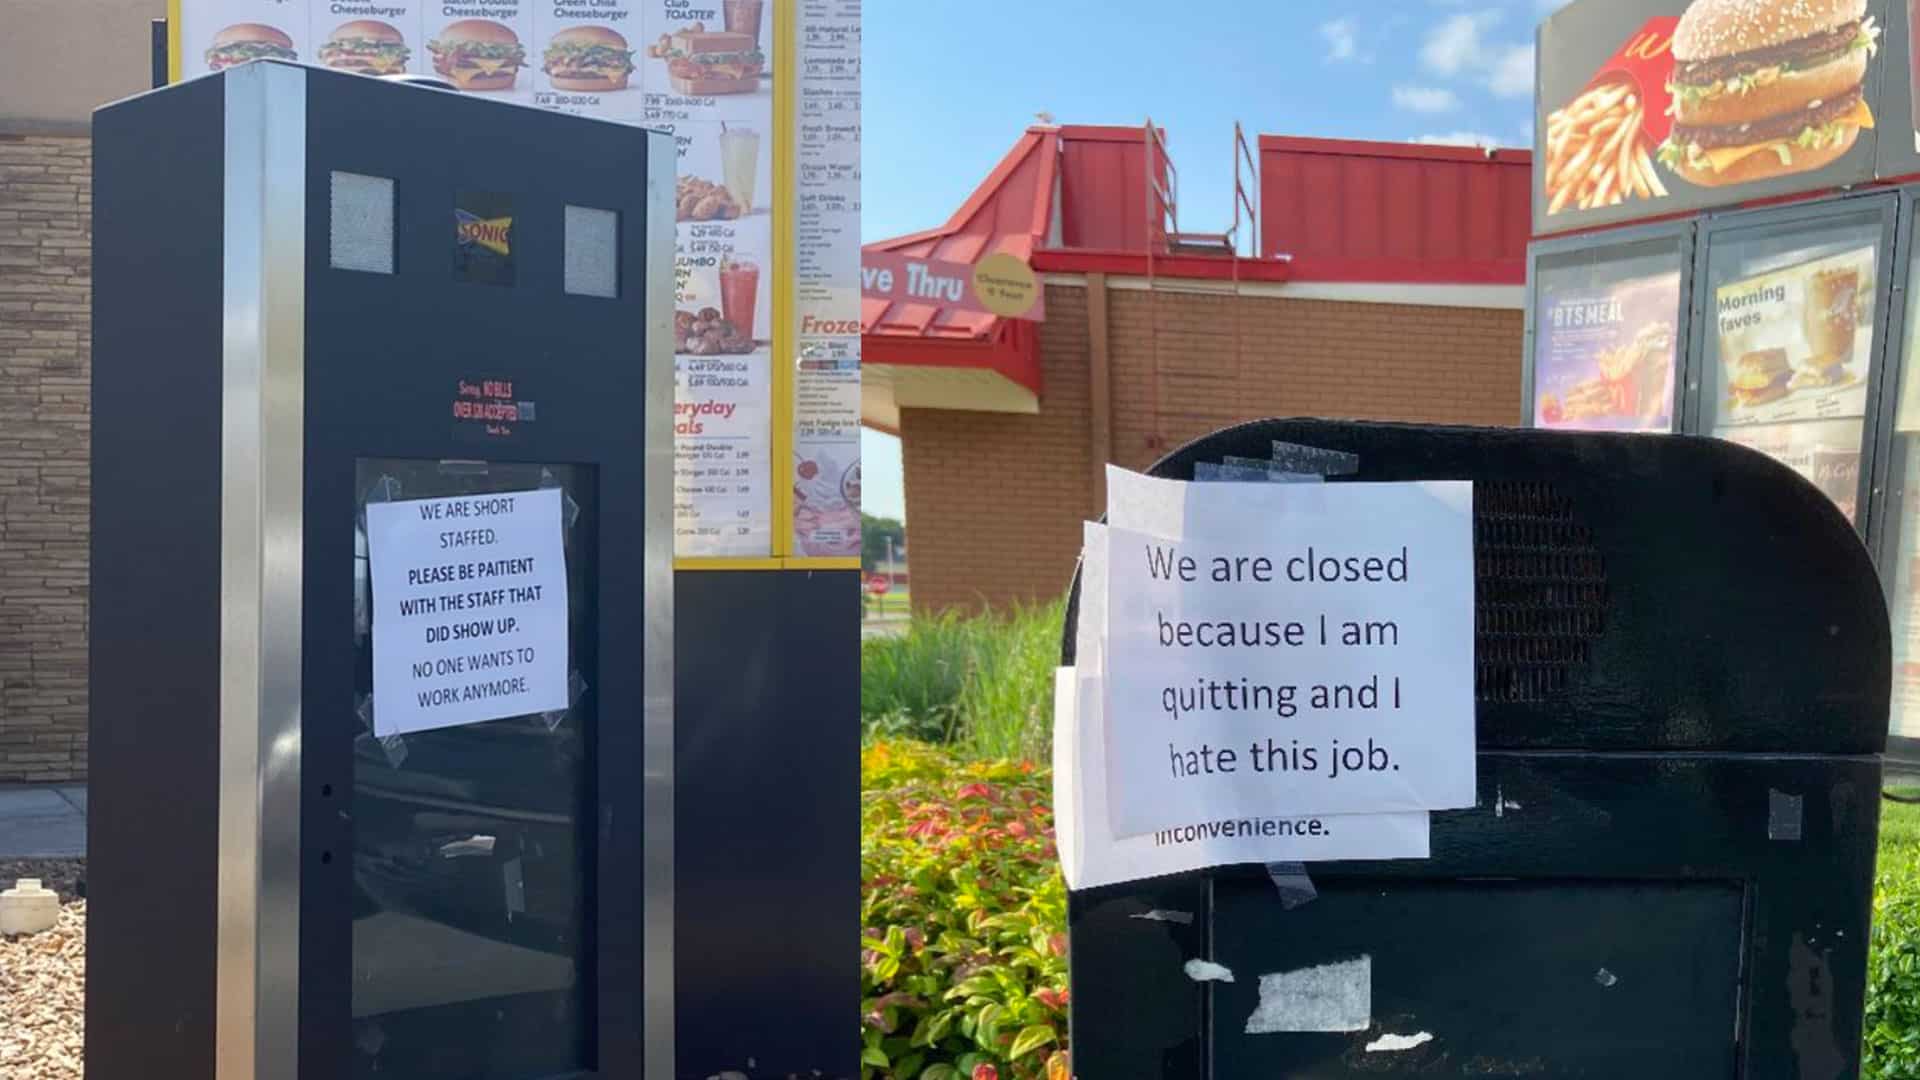 Viral Photo of McDonald’s Closed Sparks Debate | What's Trending